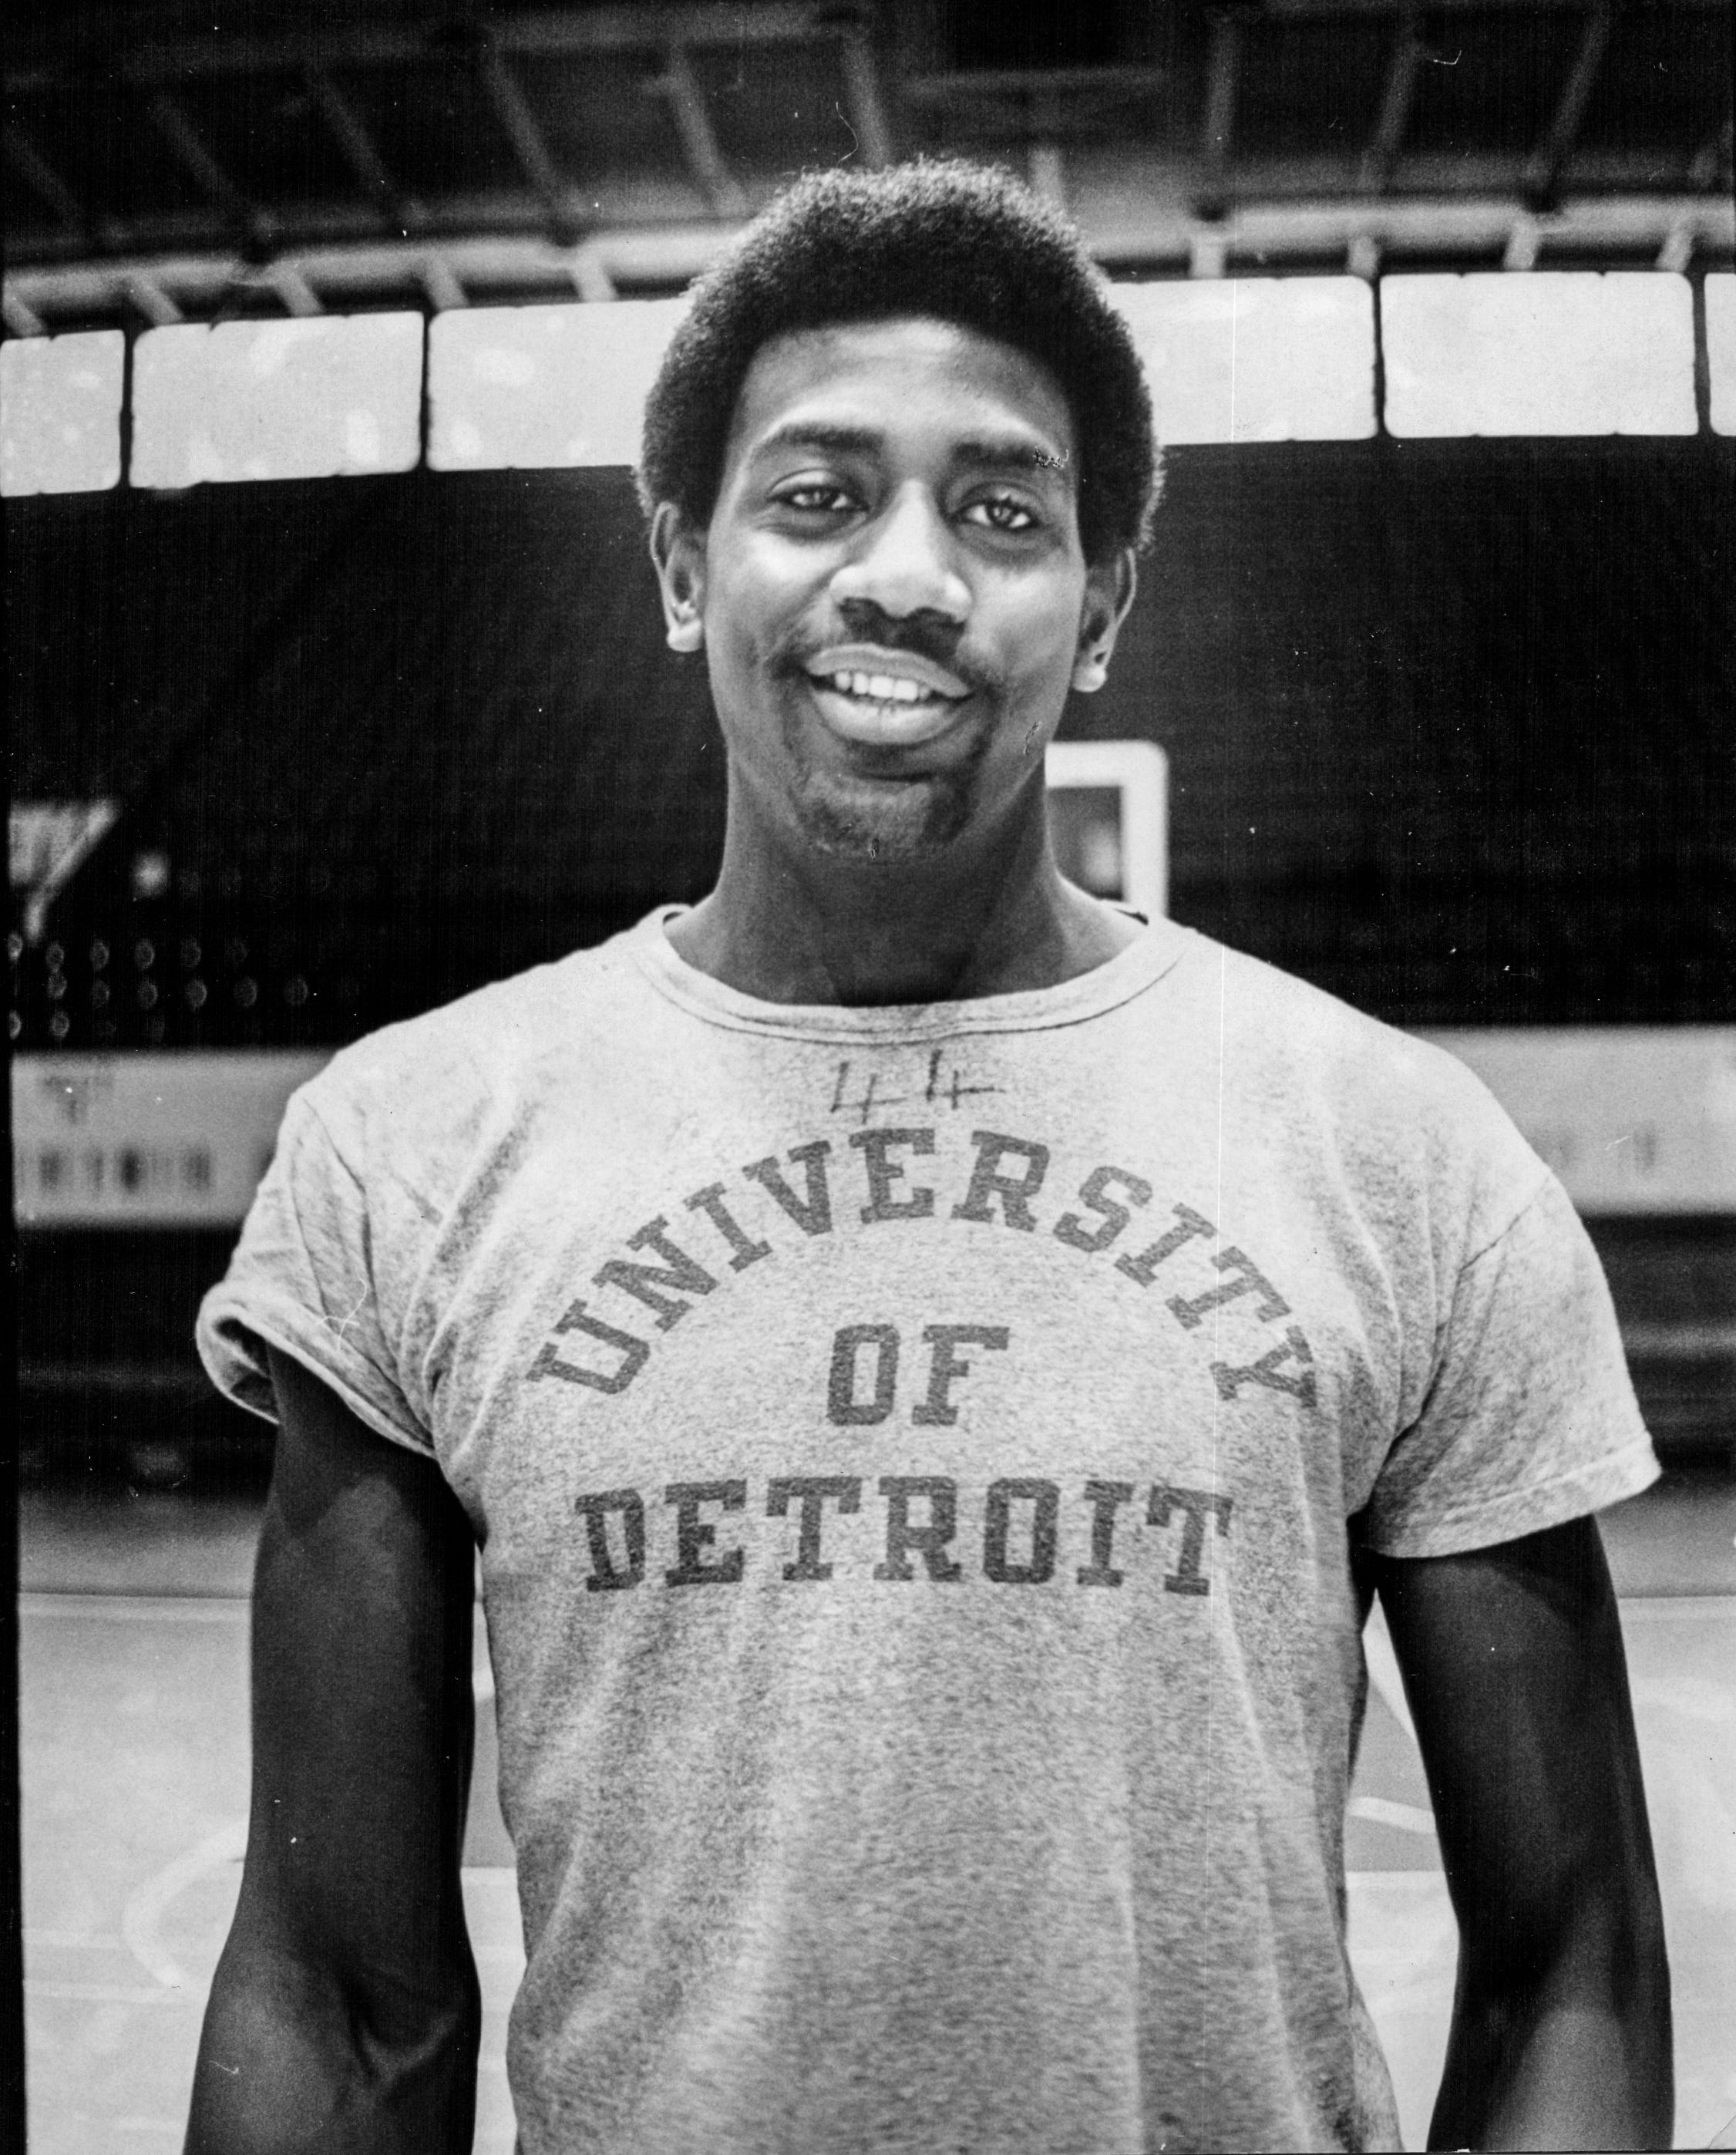 During his one season as a player at the University of Detroit, former Pershing High School standout Spencer Haywood averaged 21.2 rebounds a game to lead the nation, while also scoring 31.2 points per game. The 1968 Olympian would later make even more news with his decision to turn pro after his sophomore college season, a decision which continues to impact the NBA today.